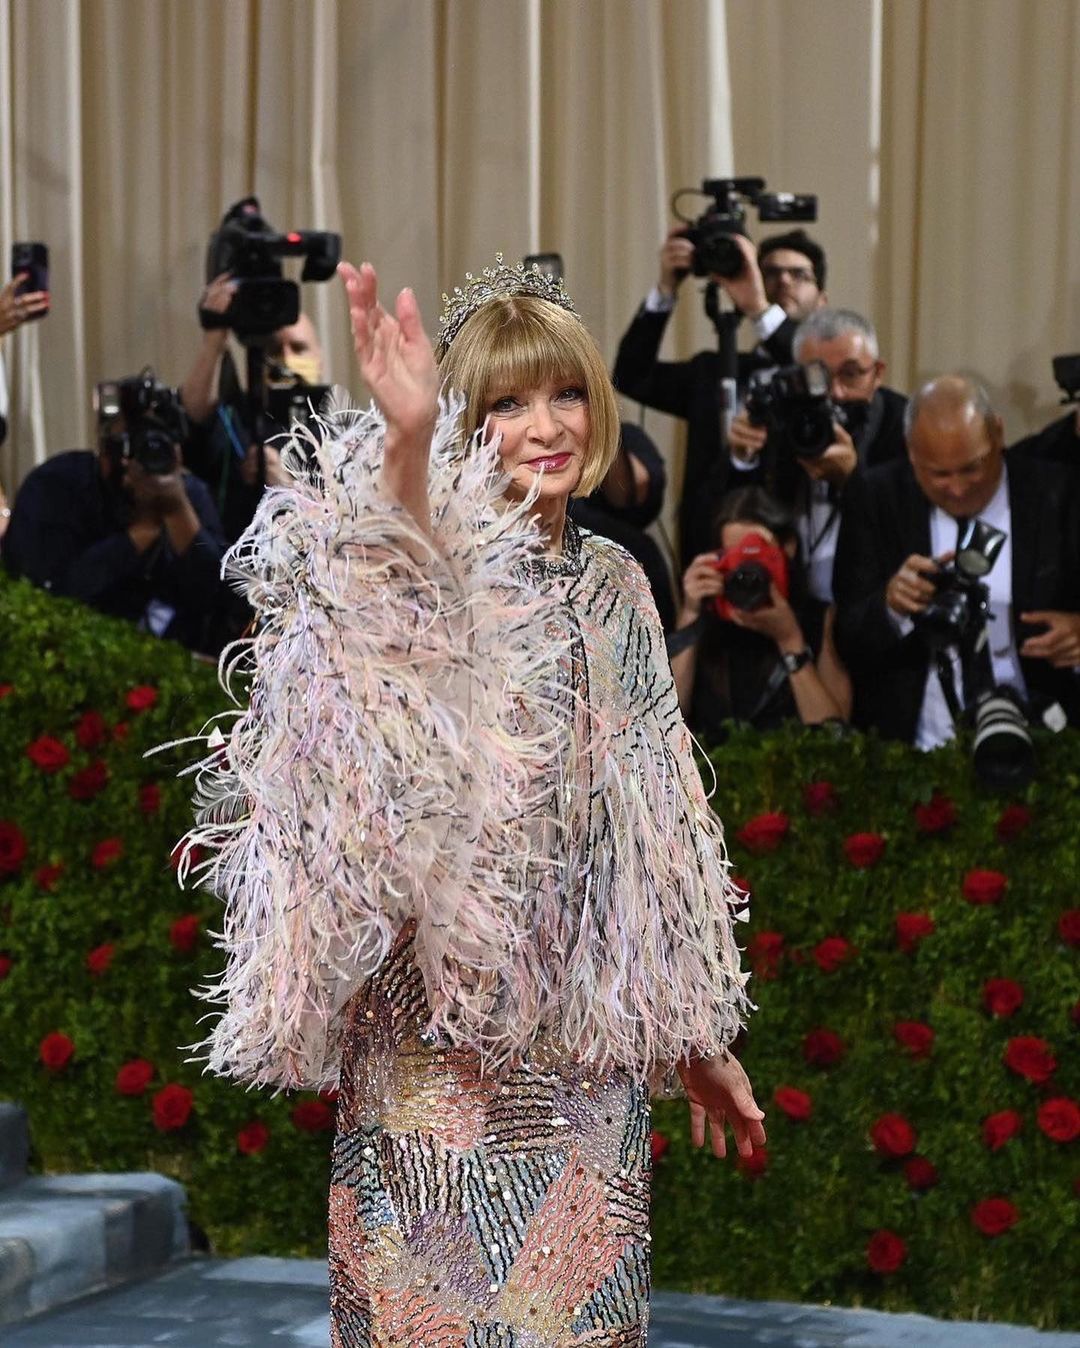 Anna Wintour Is The World's Most Influential Fashion Editor And Grand Owner Of The Met Gala